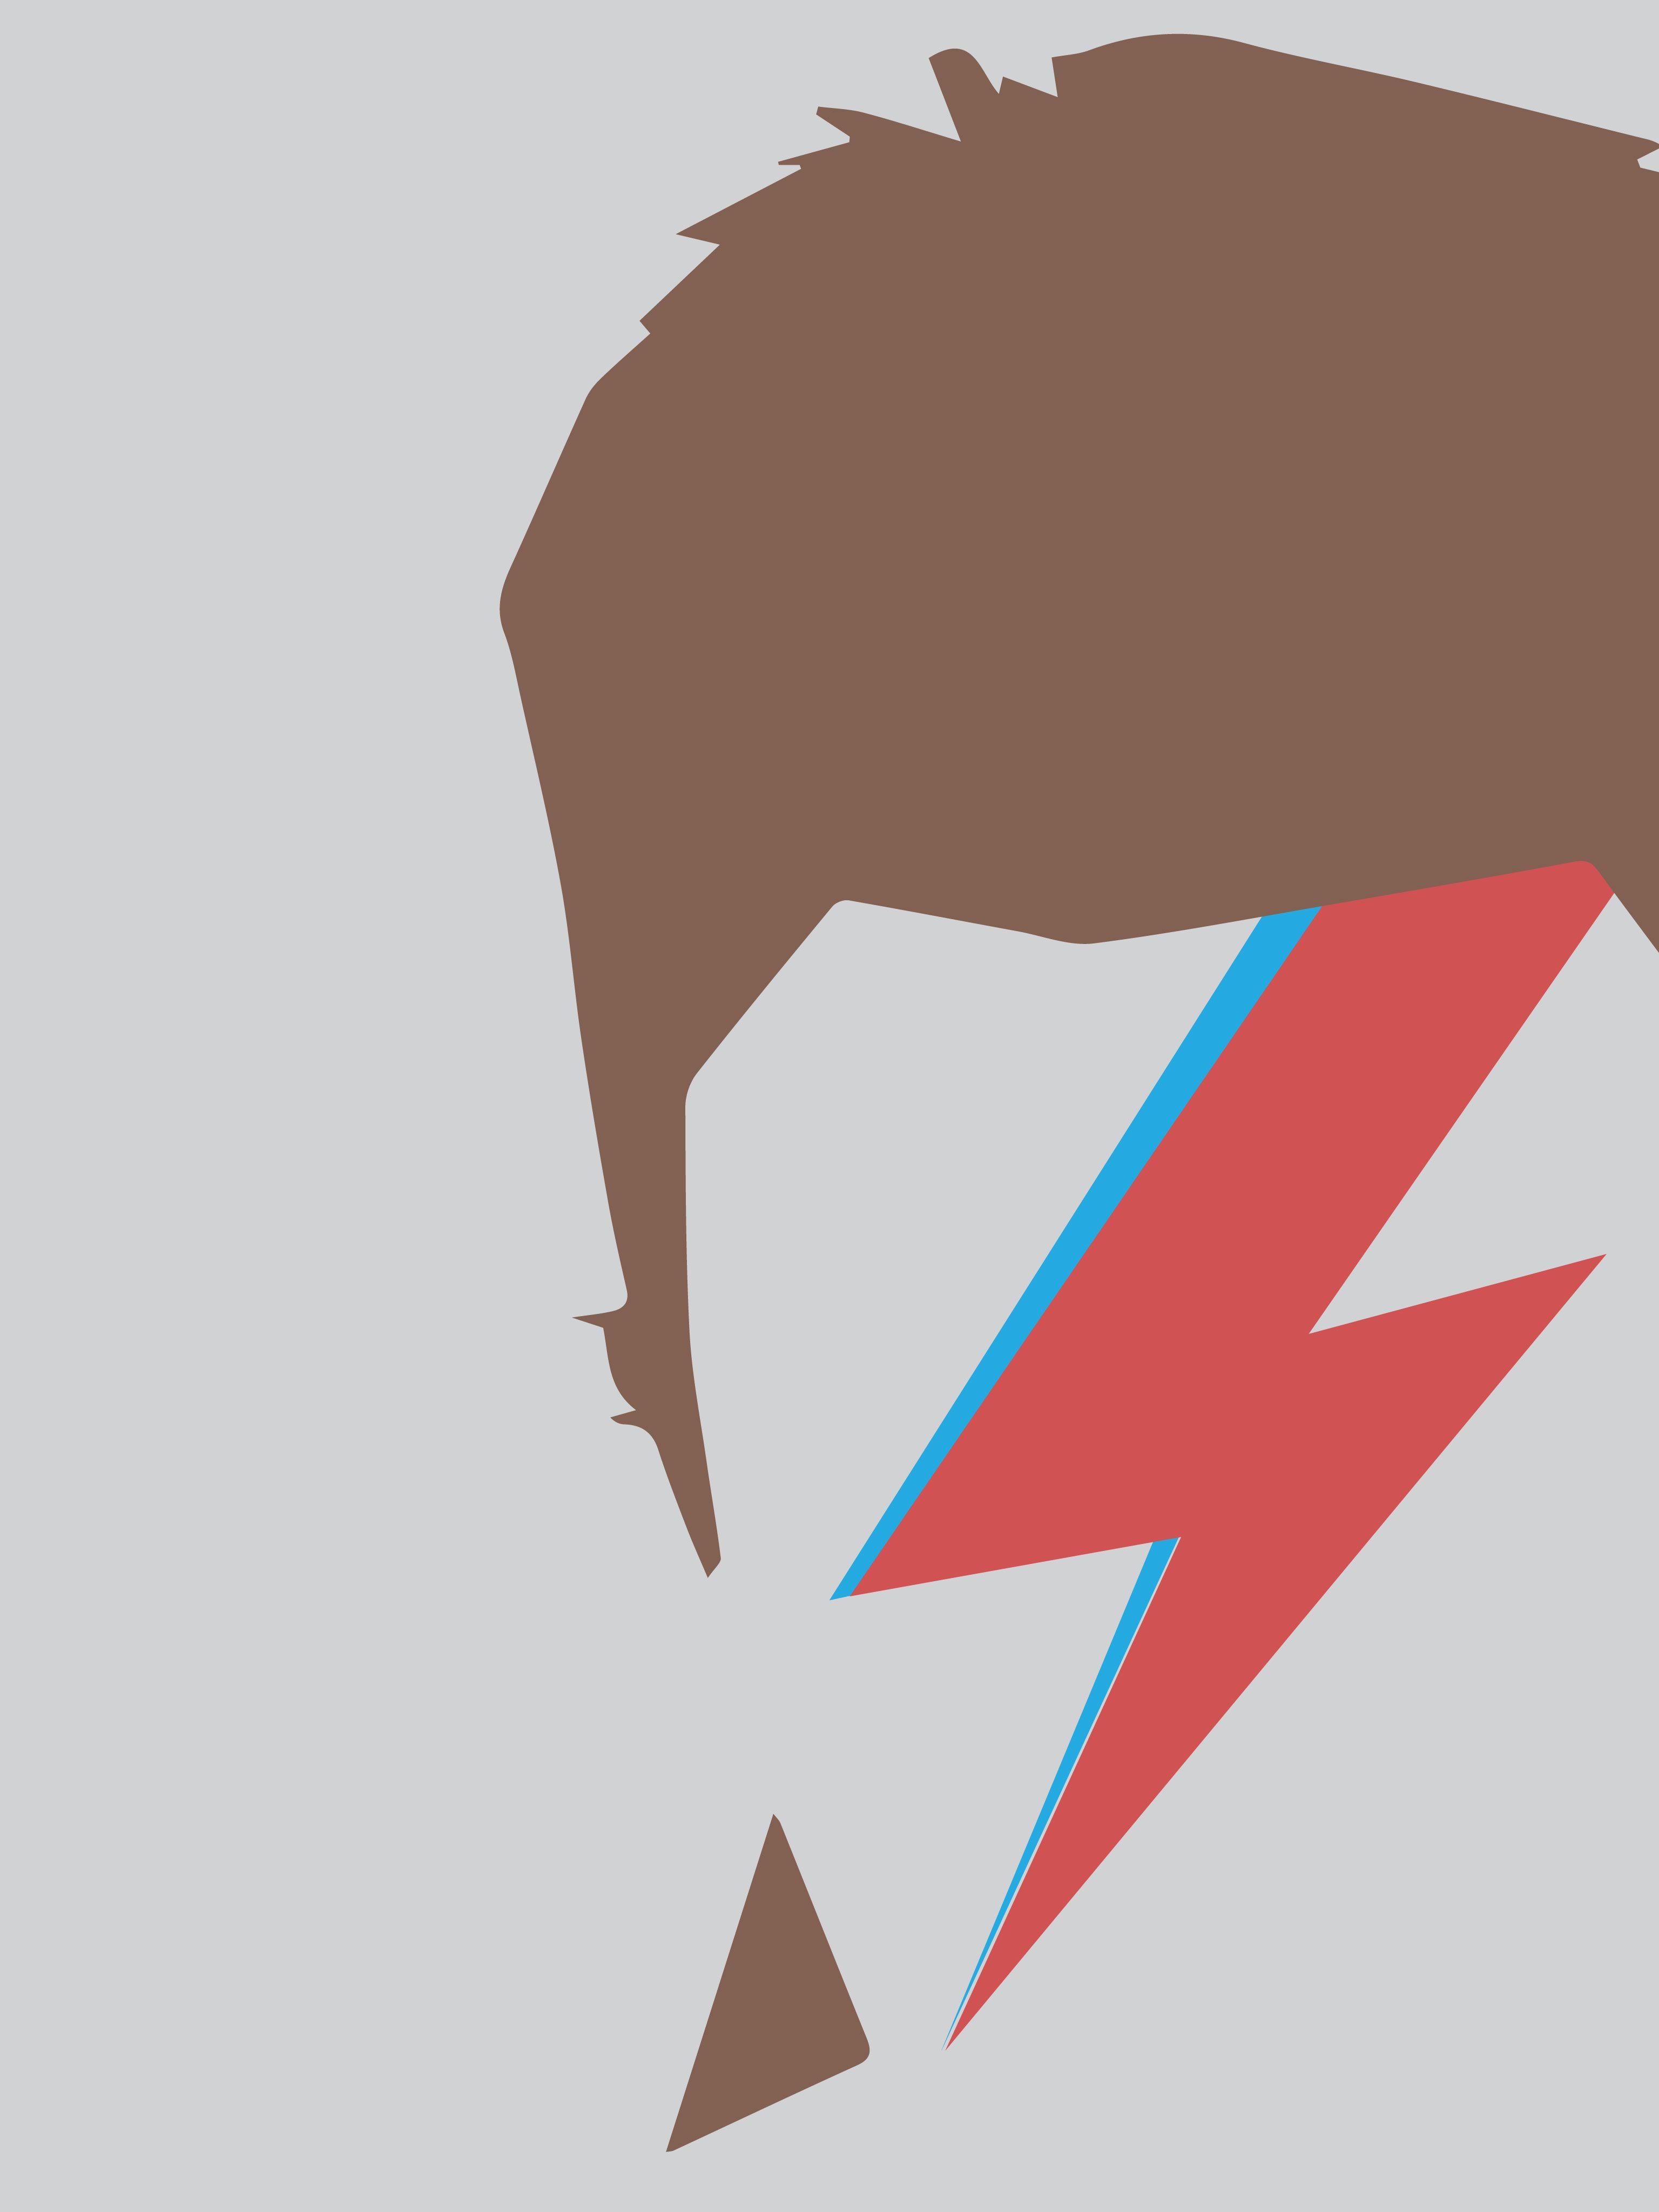 David Bowie Iphone Wallpapers Top Free David Bowie Iphone Backgrounds Wallpaperaccess 5722